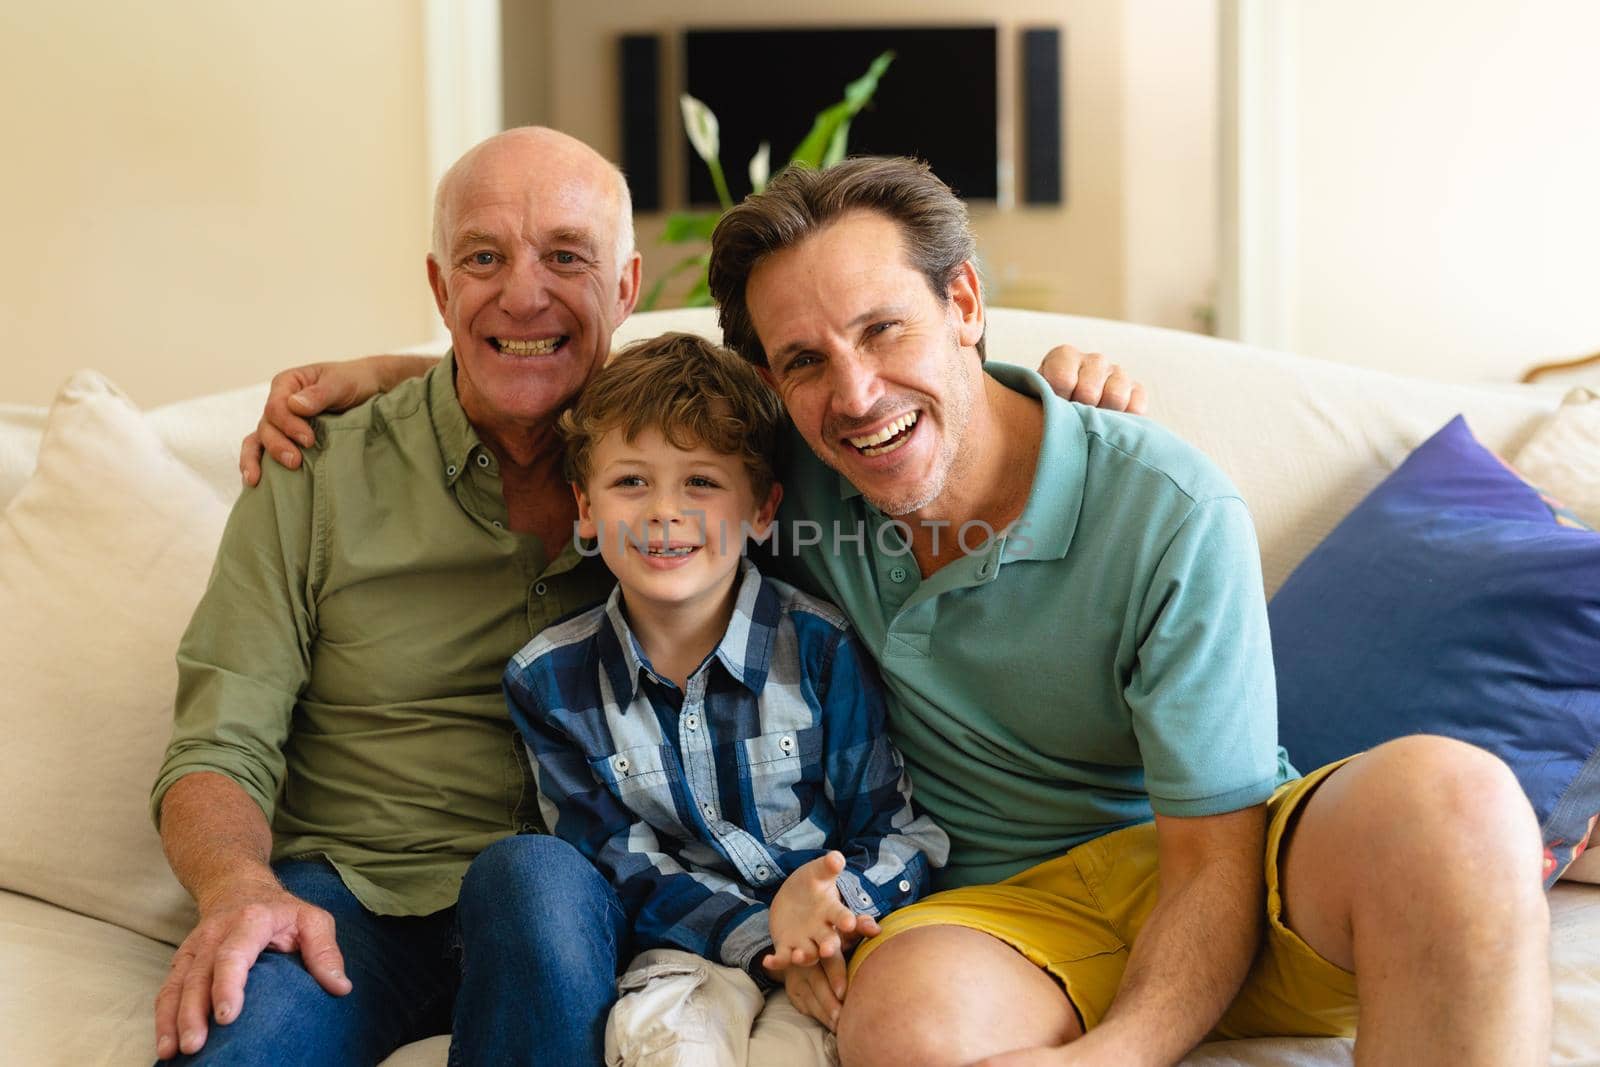 Portrait of caucasian grandfather, father and son smiling while sitting together on couch at home. family, love and togetherness concept, unaltered.